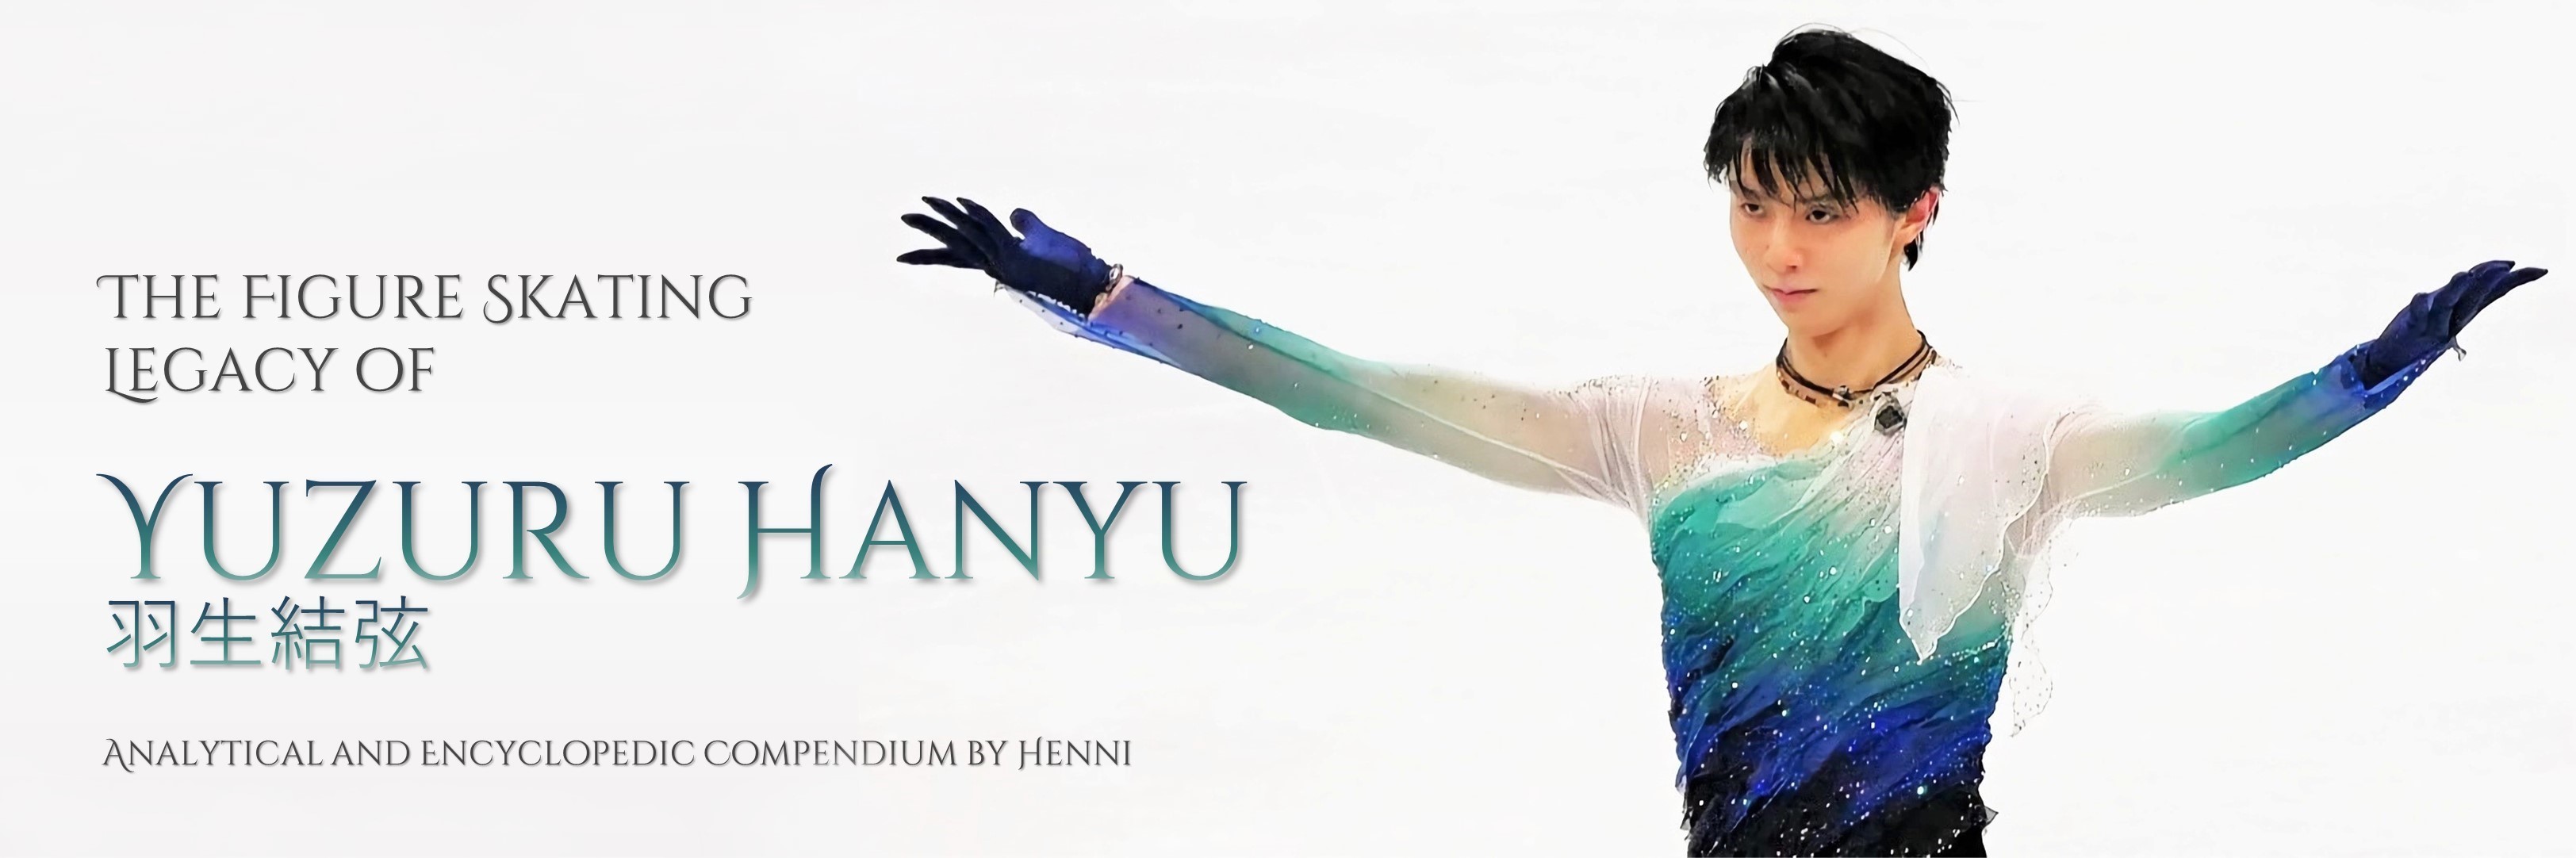 Website title; image depicting Hanyu after his free skate "Hope and Legacy" at the 2017 World Championships